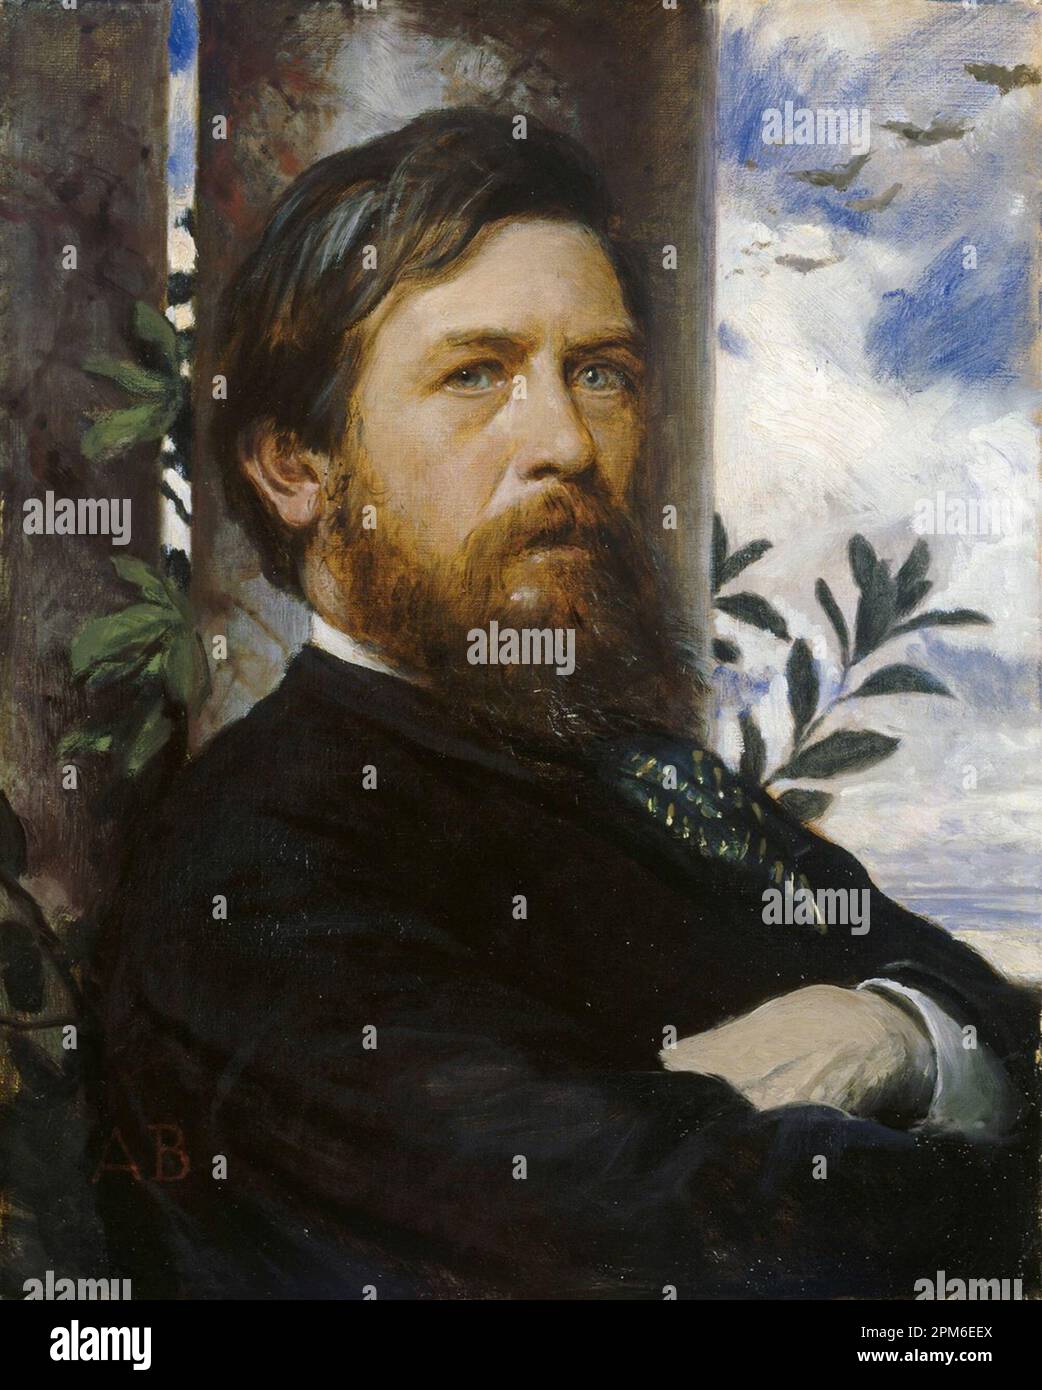 A self-portrait (1873) painted by the 19th Century Swiss symbolist ...